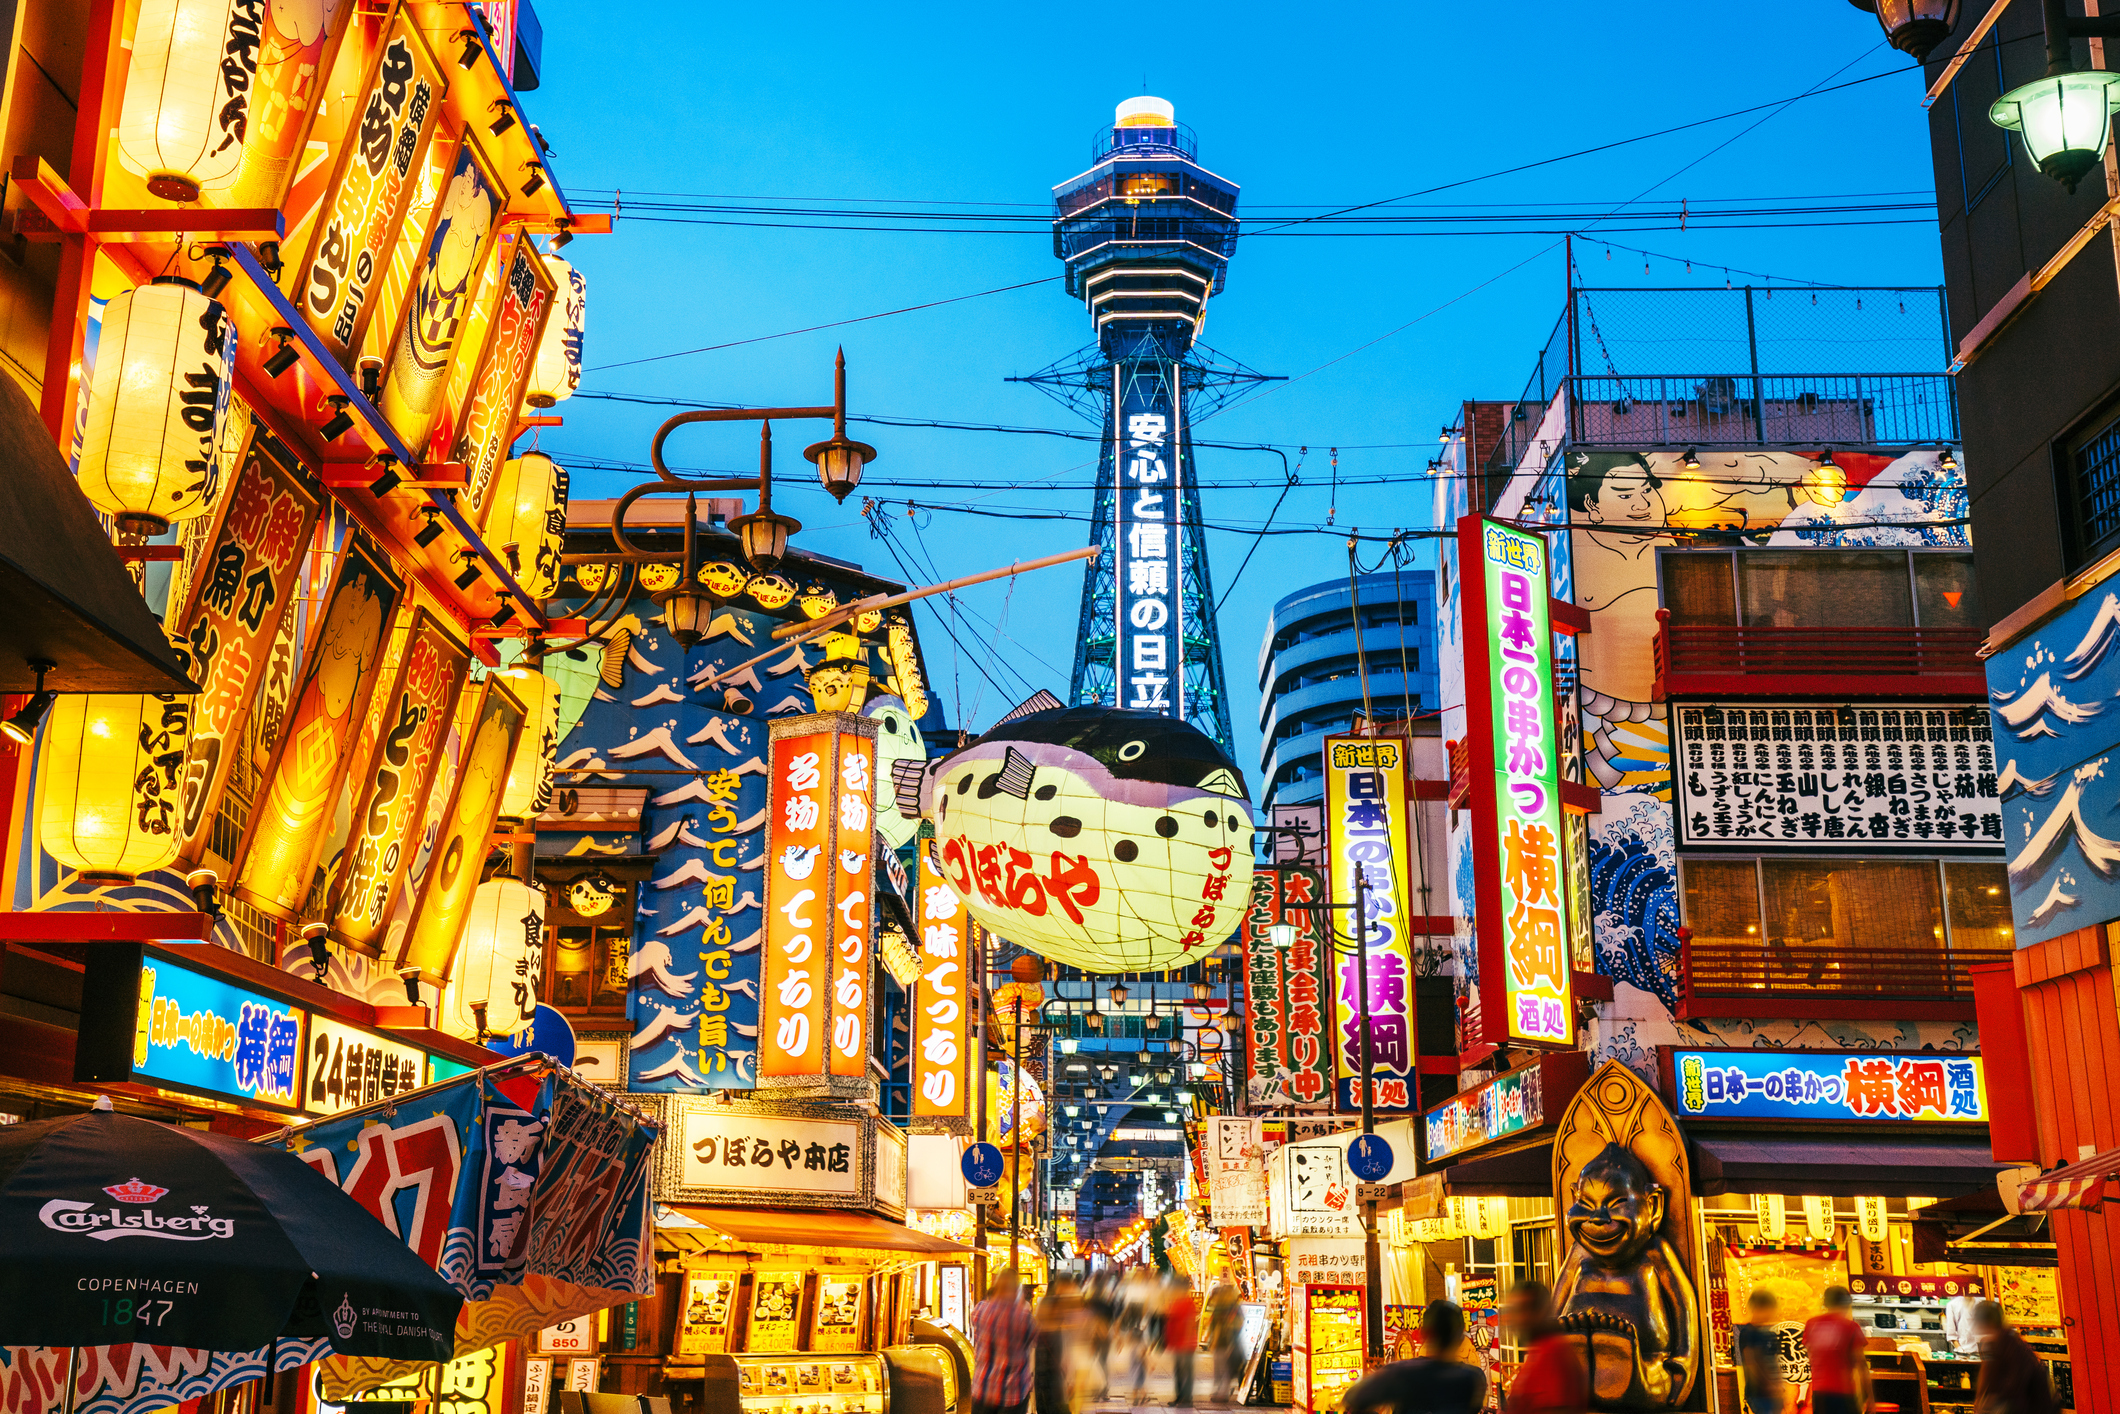 Beautiful Japanese landscapes Osaka Tower and view of the neon advertisements Shinsekai district